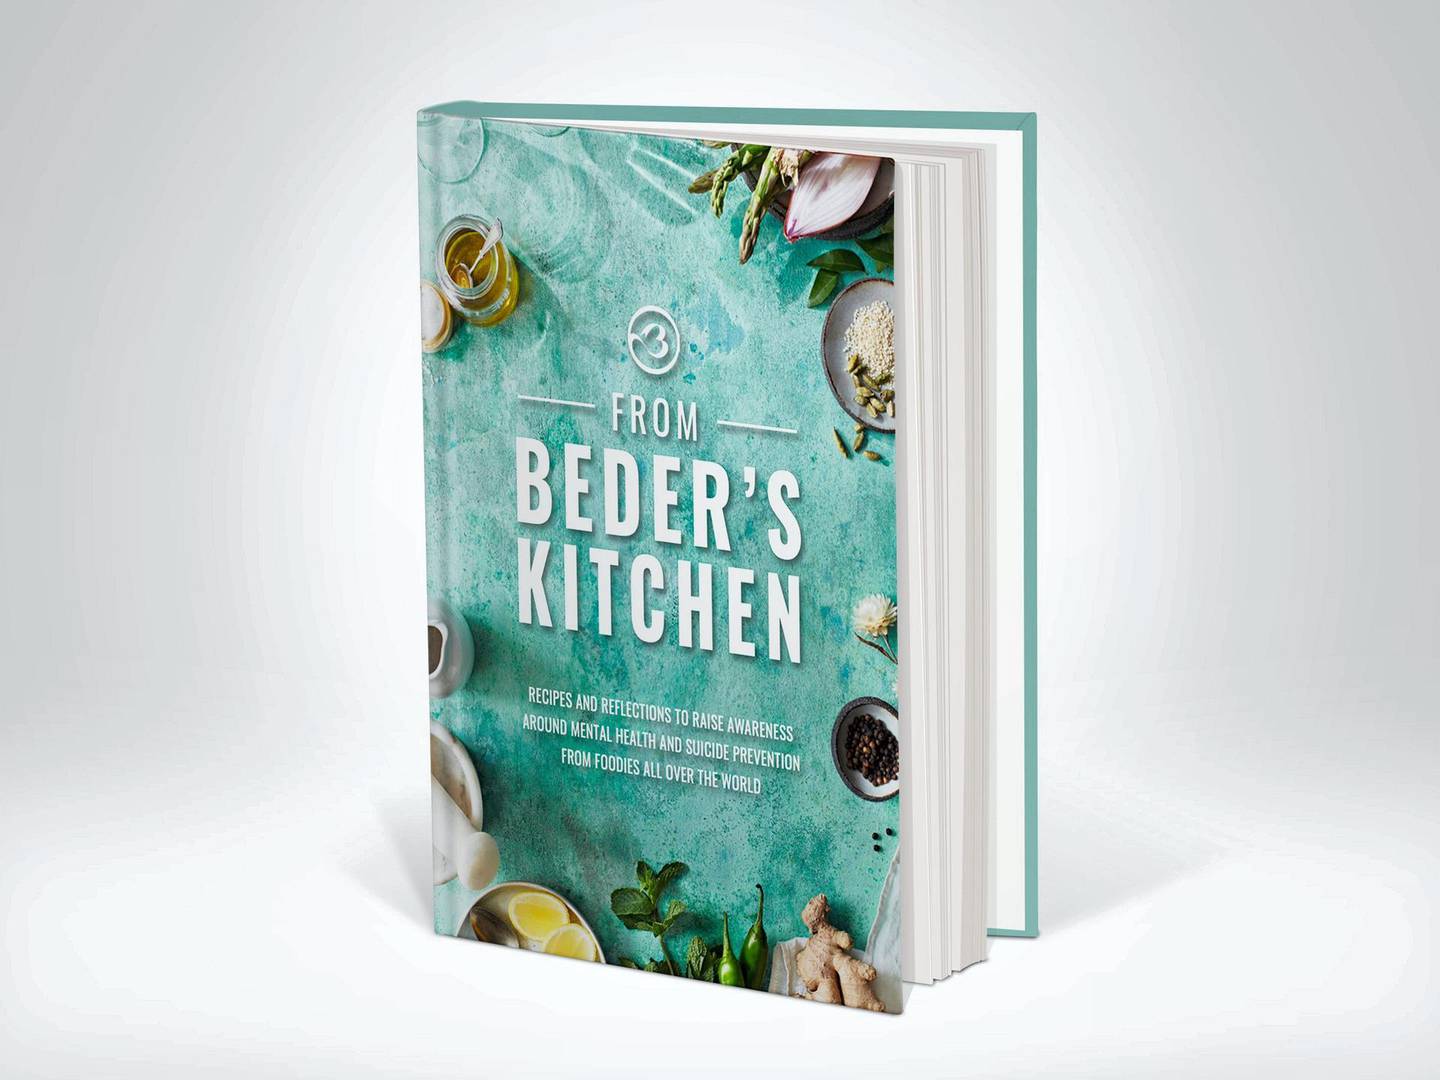 Razzak Mirjan, a lawyer from a prominent Iraqi family, is doing just with a new celebrity-filled charity cookbook. Beder's Kitchen.